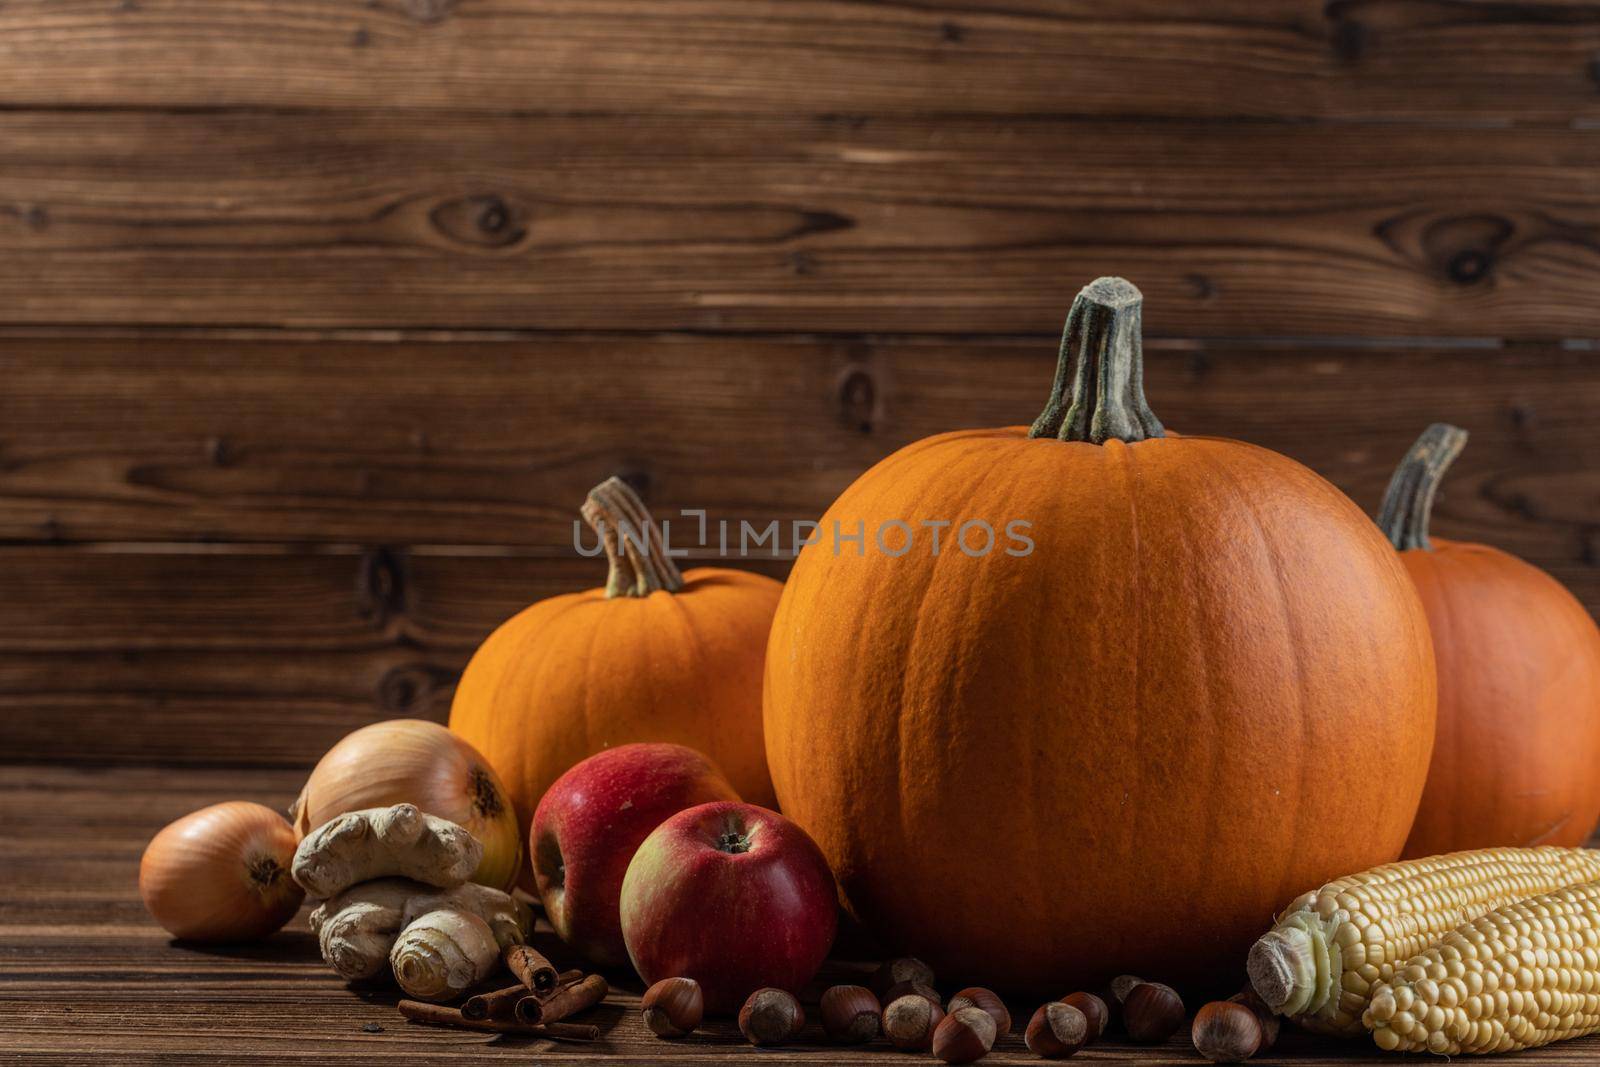 Autumn harvest still life with pumpkins, apples, hazelnut, corn on wooden background with copy space for text